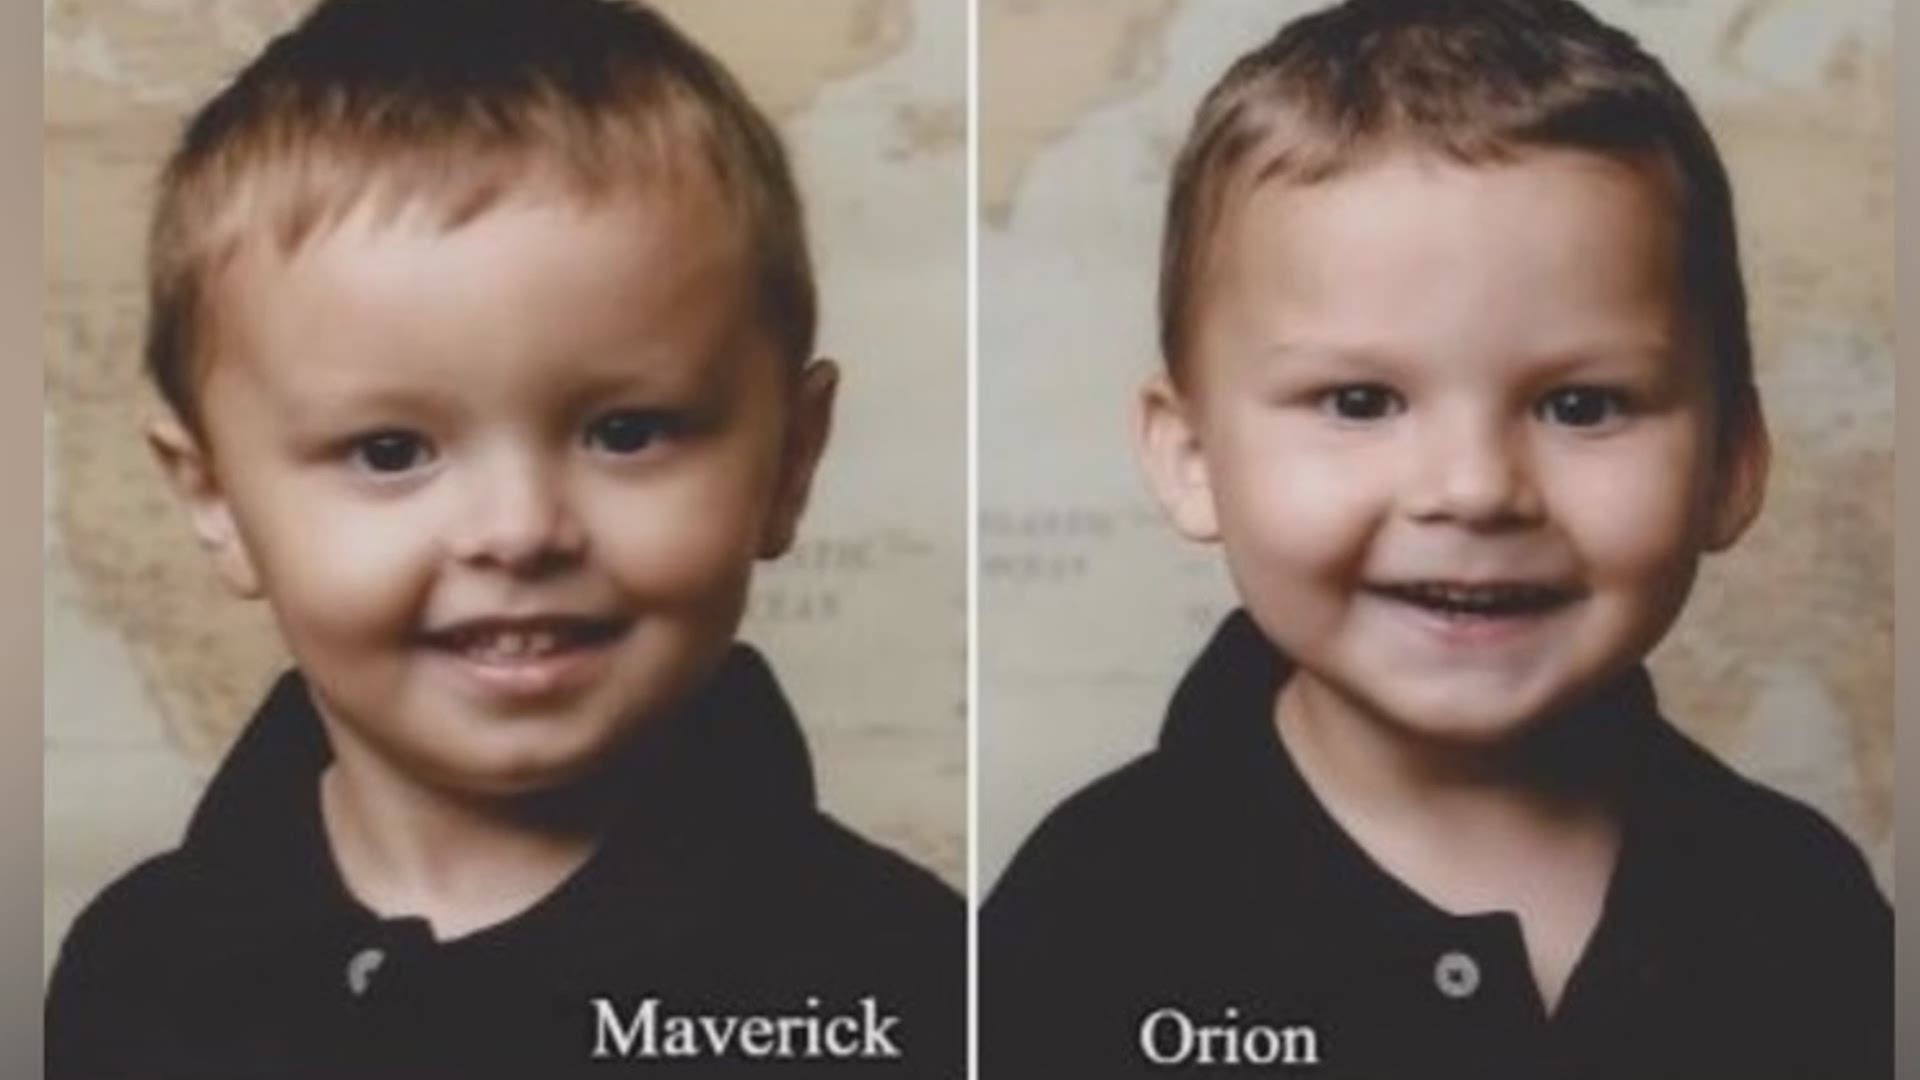 Maverick Ransom, 3, and his brother Orion Ransom, 4, haven't been seen since Oct. 8 when they were picked up by their father at a Las Cruces, New Mexico daycare.